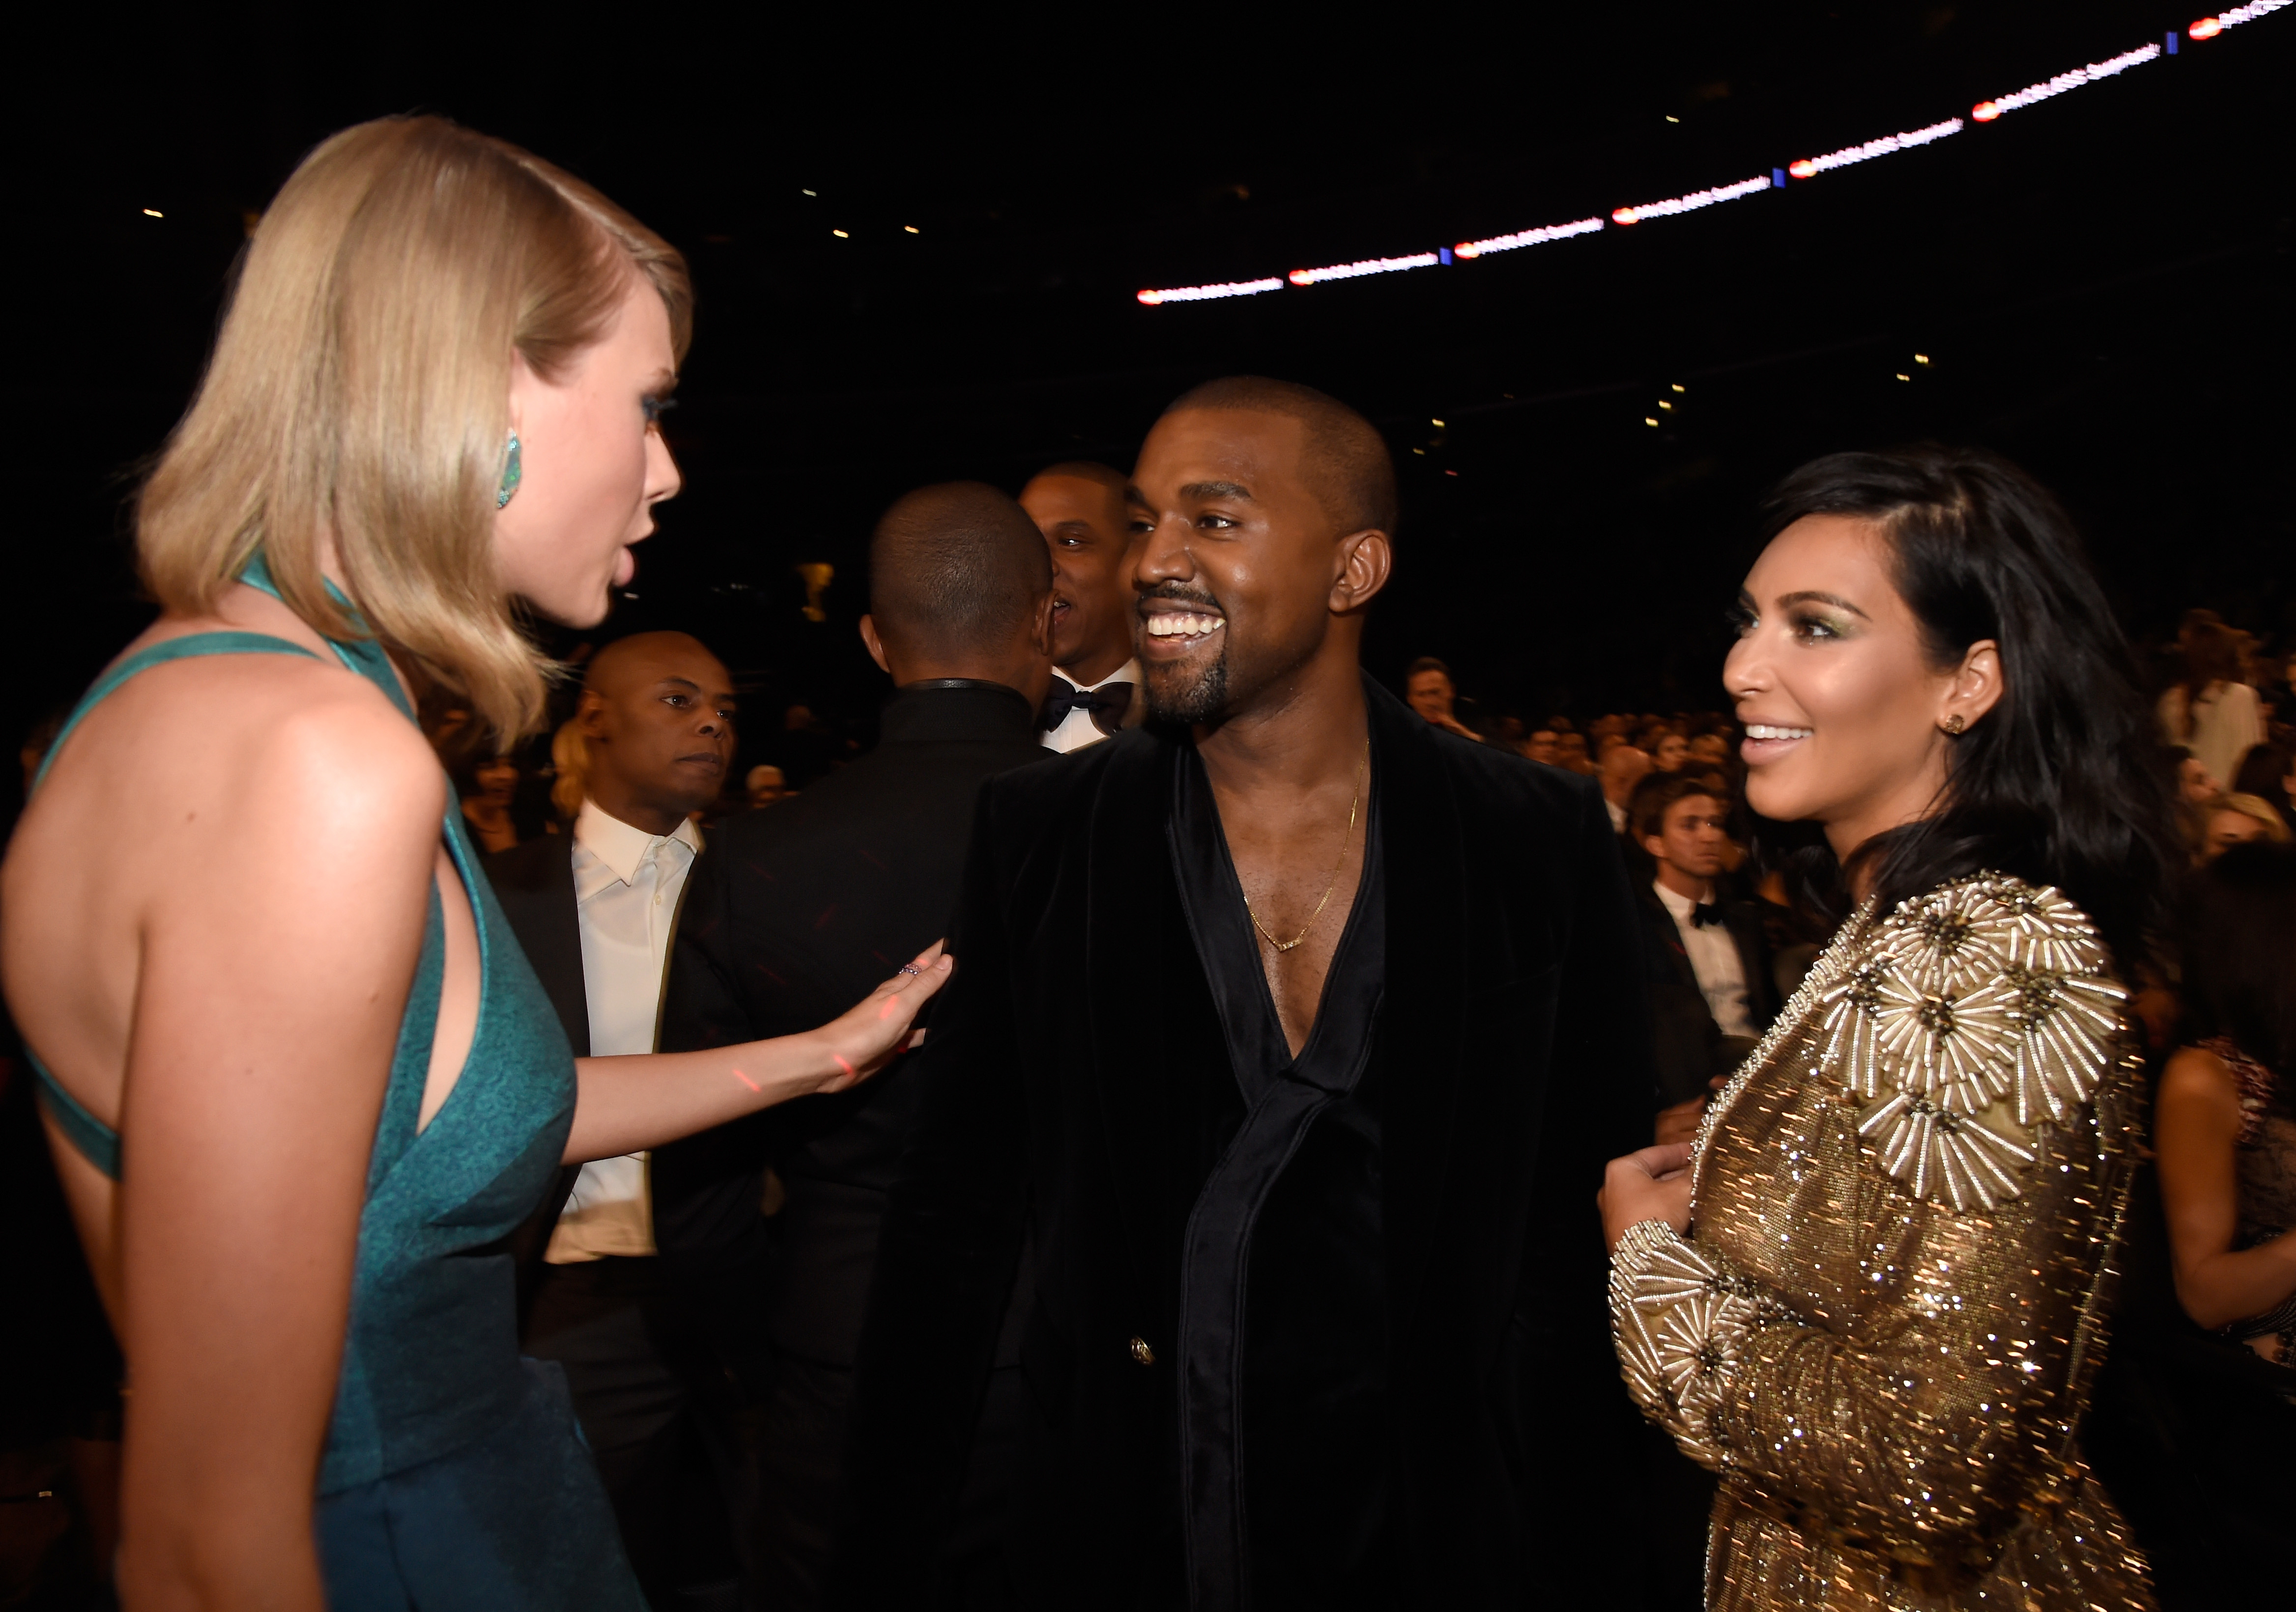 Taylor speaking to Kanye and Kim Kardashian at a media event